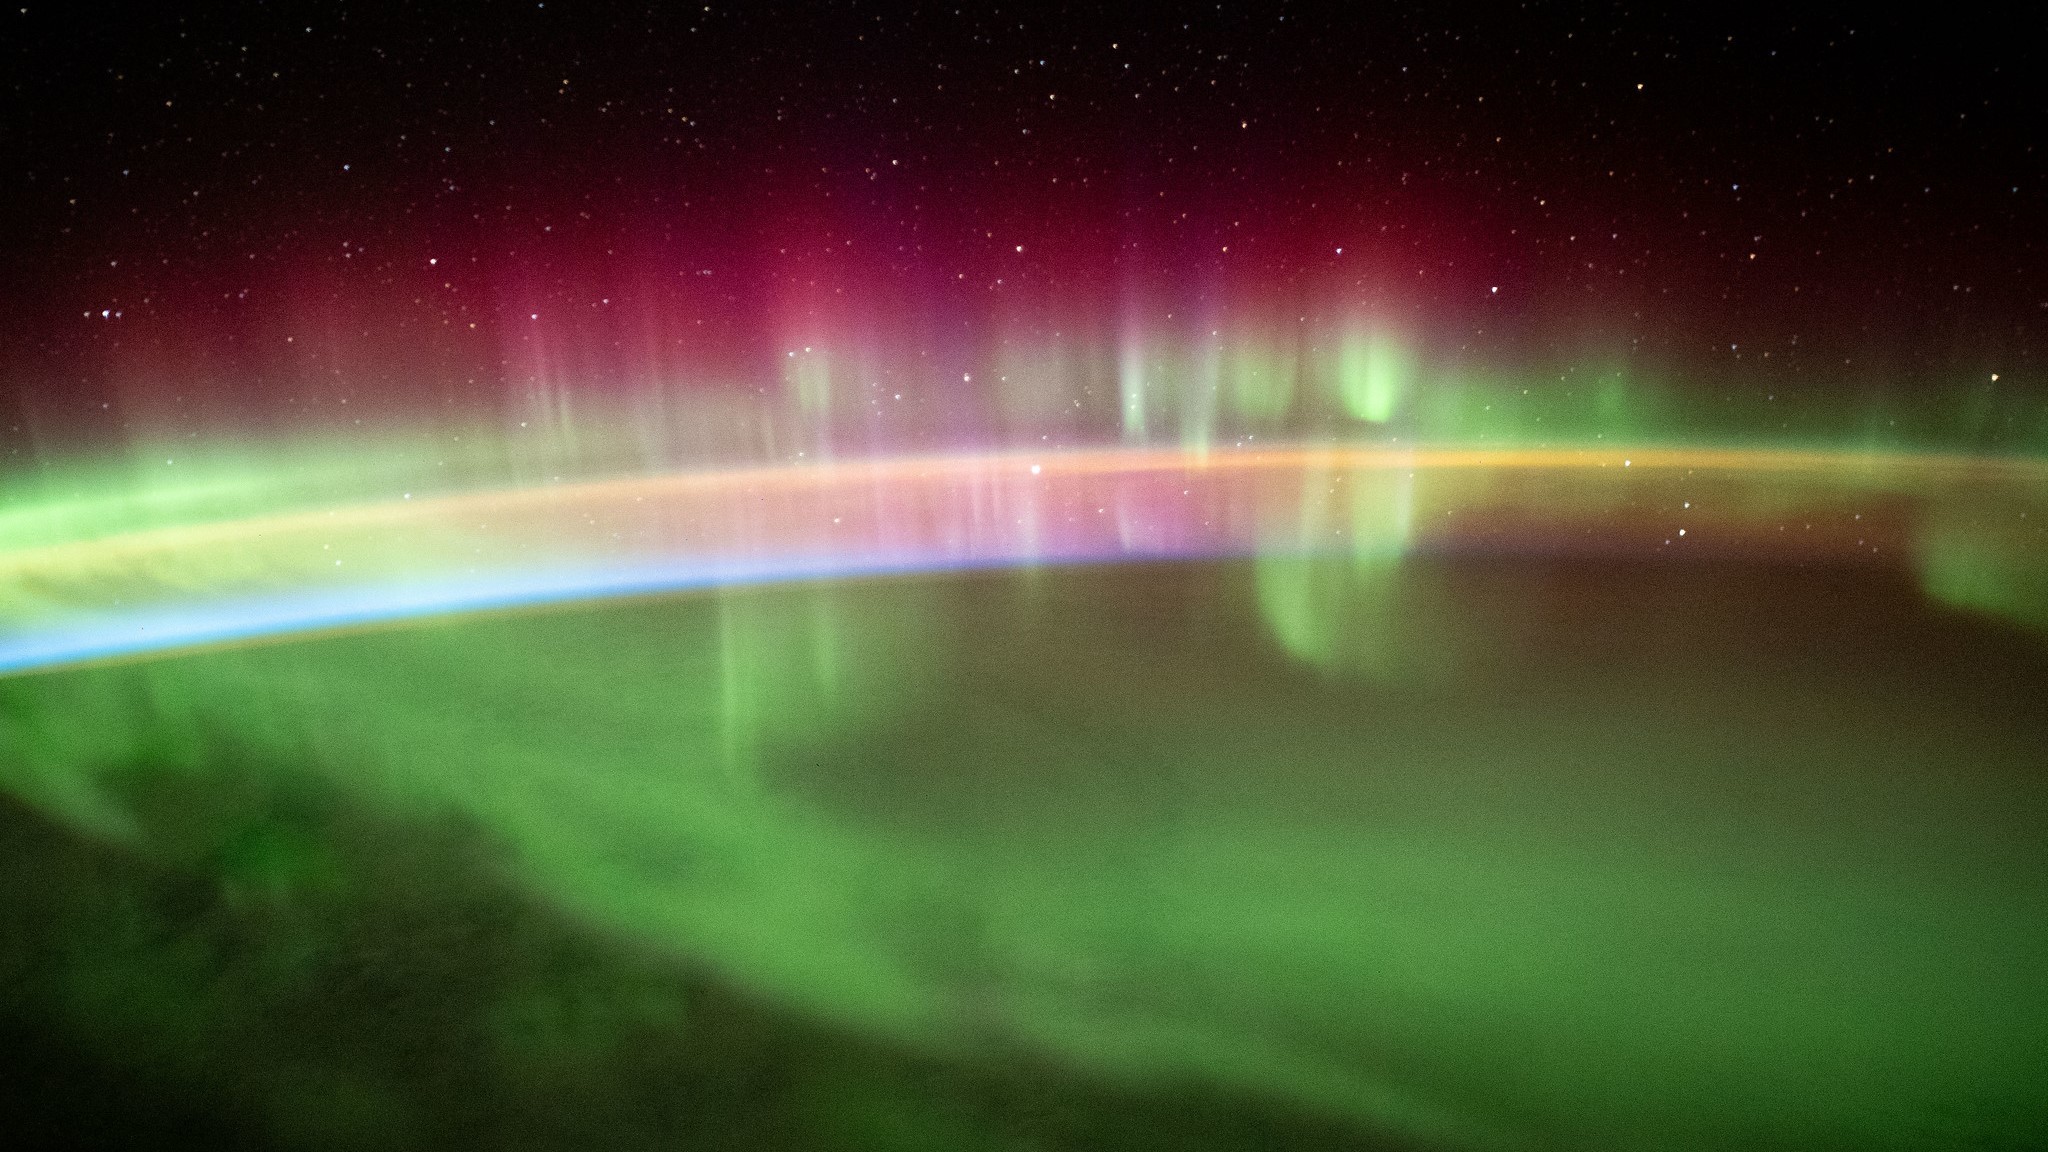 Spectacular image of the aurora seen from the International Space Station ISS